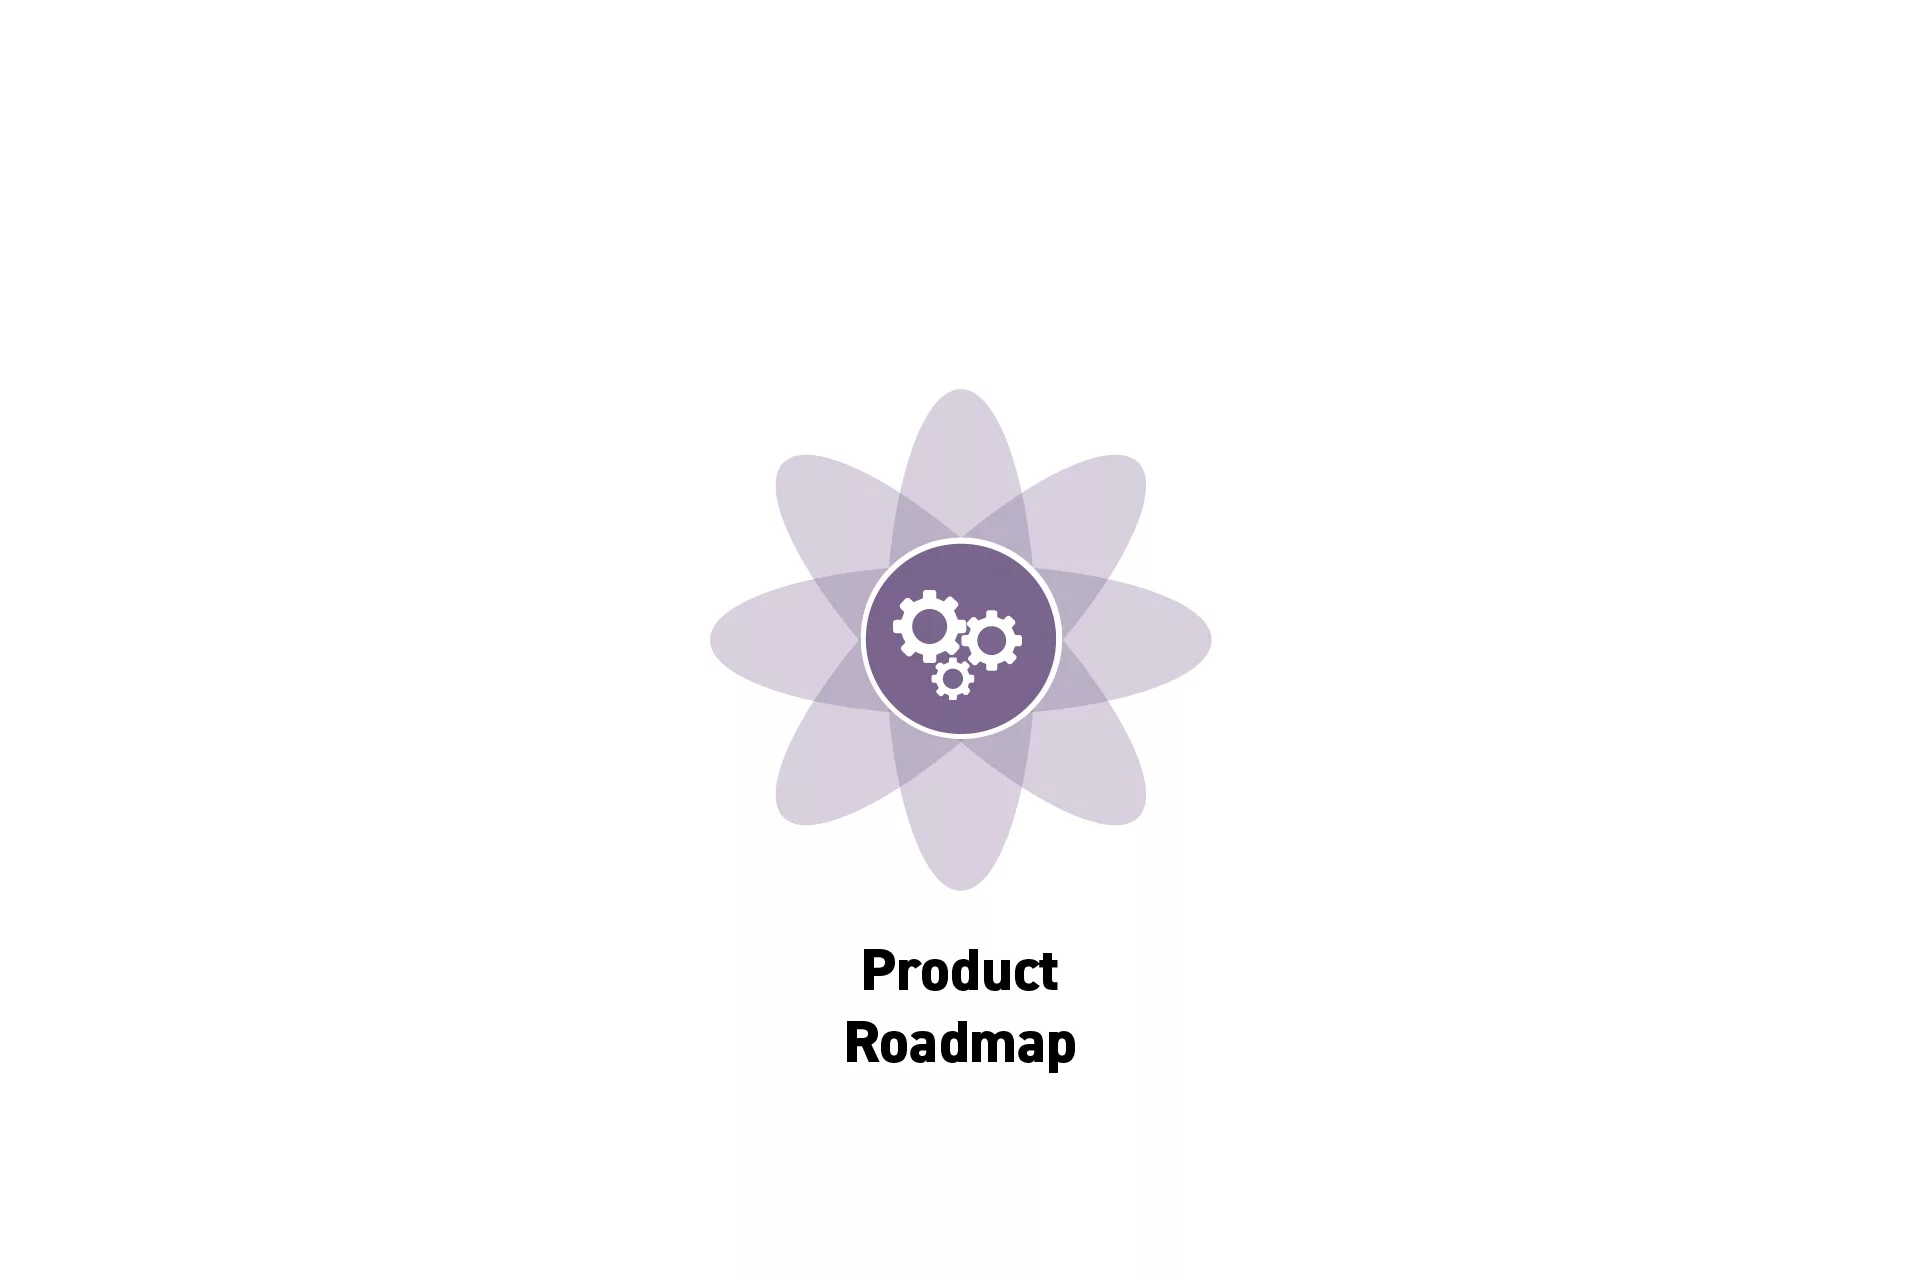 <p>A flower that represents Project Management with the text “Product Roadmap” beneath it.</p>